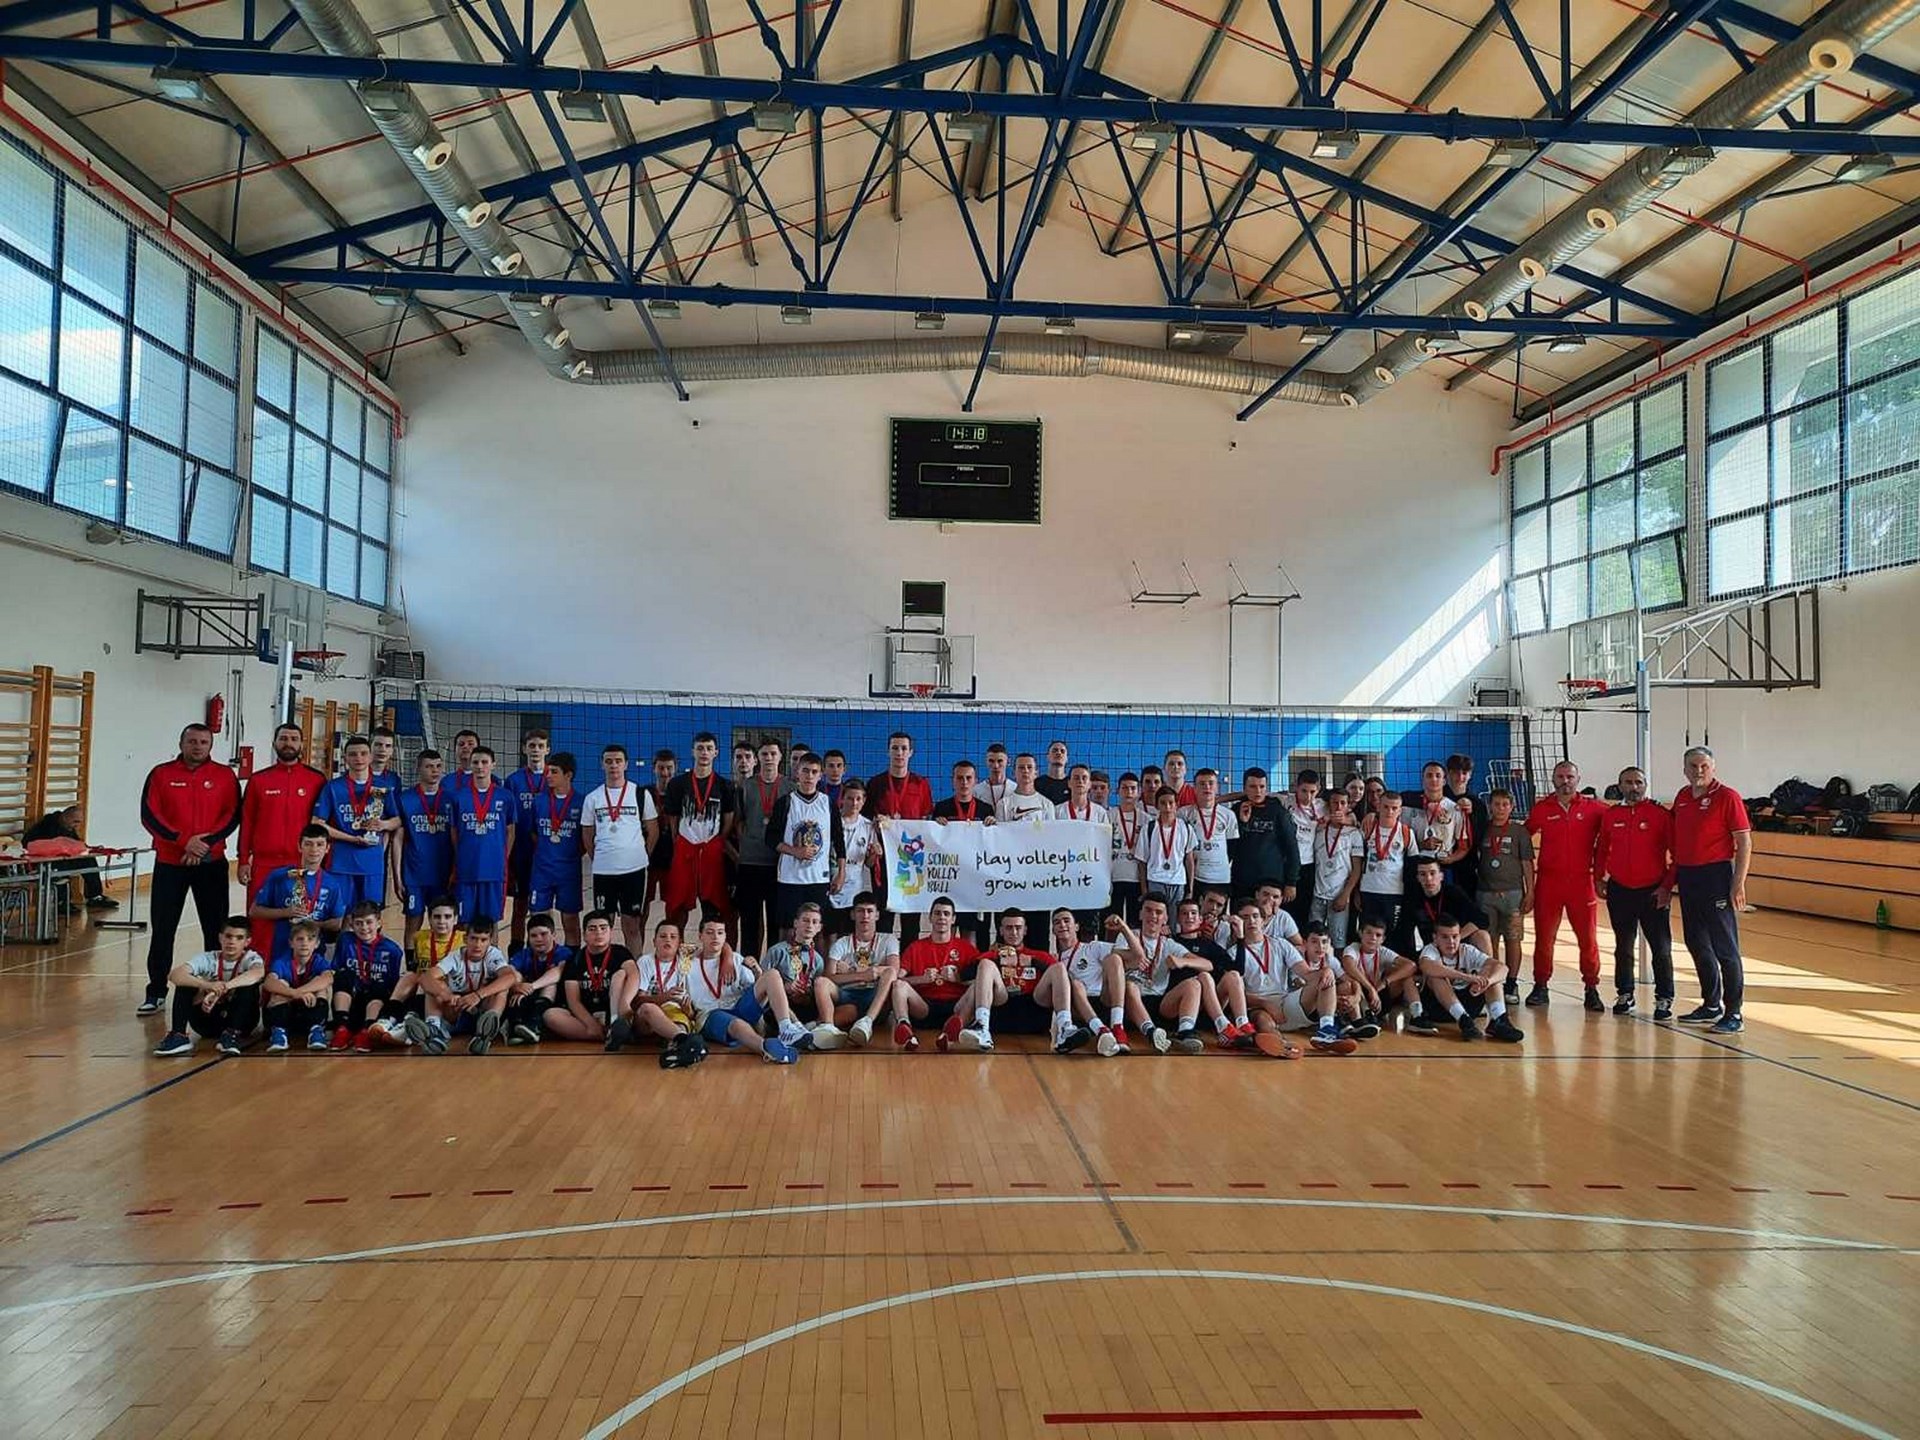 Final act of Free Volleyball School involves 60 young boys from across Montenegro